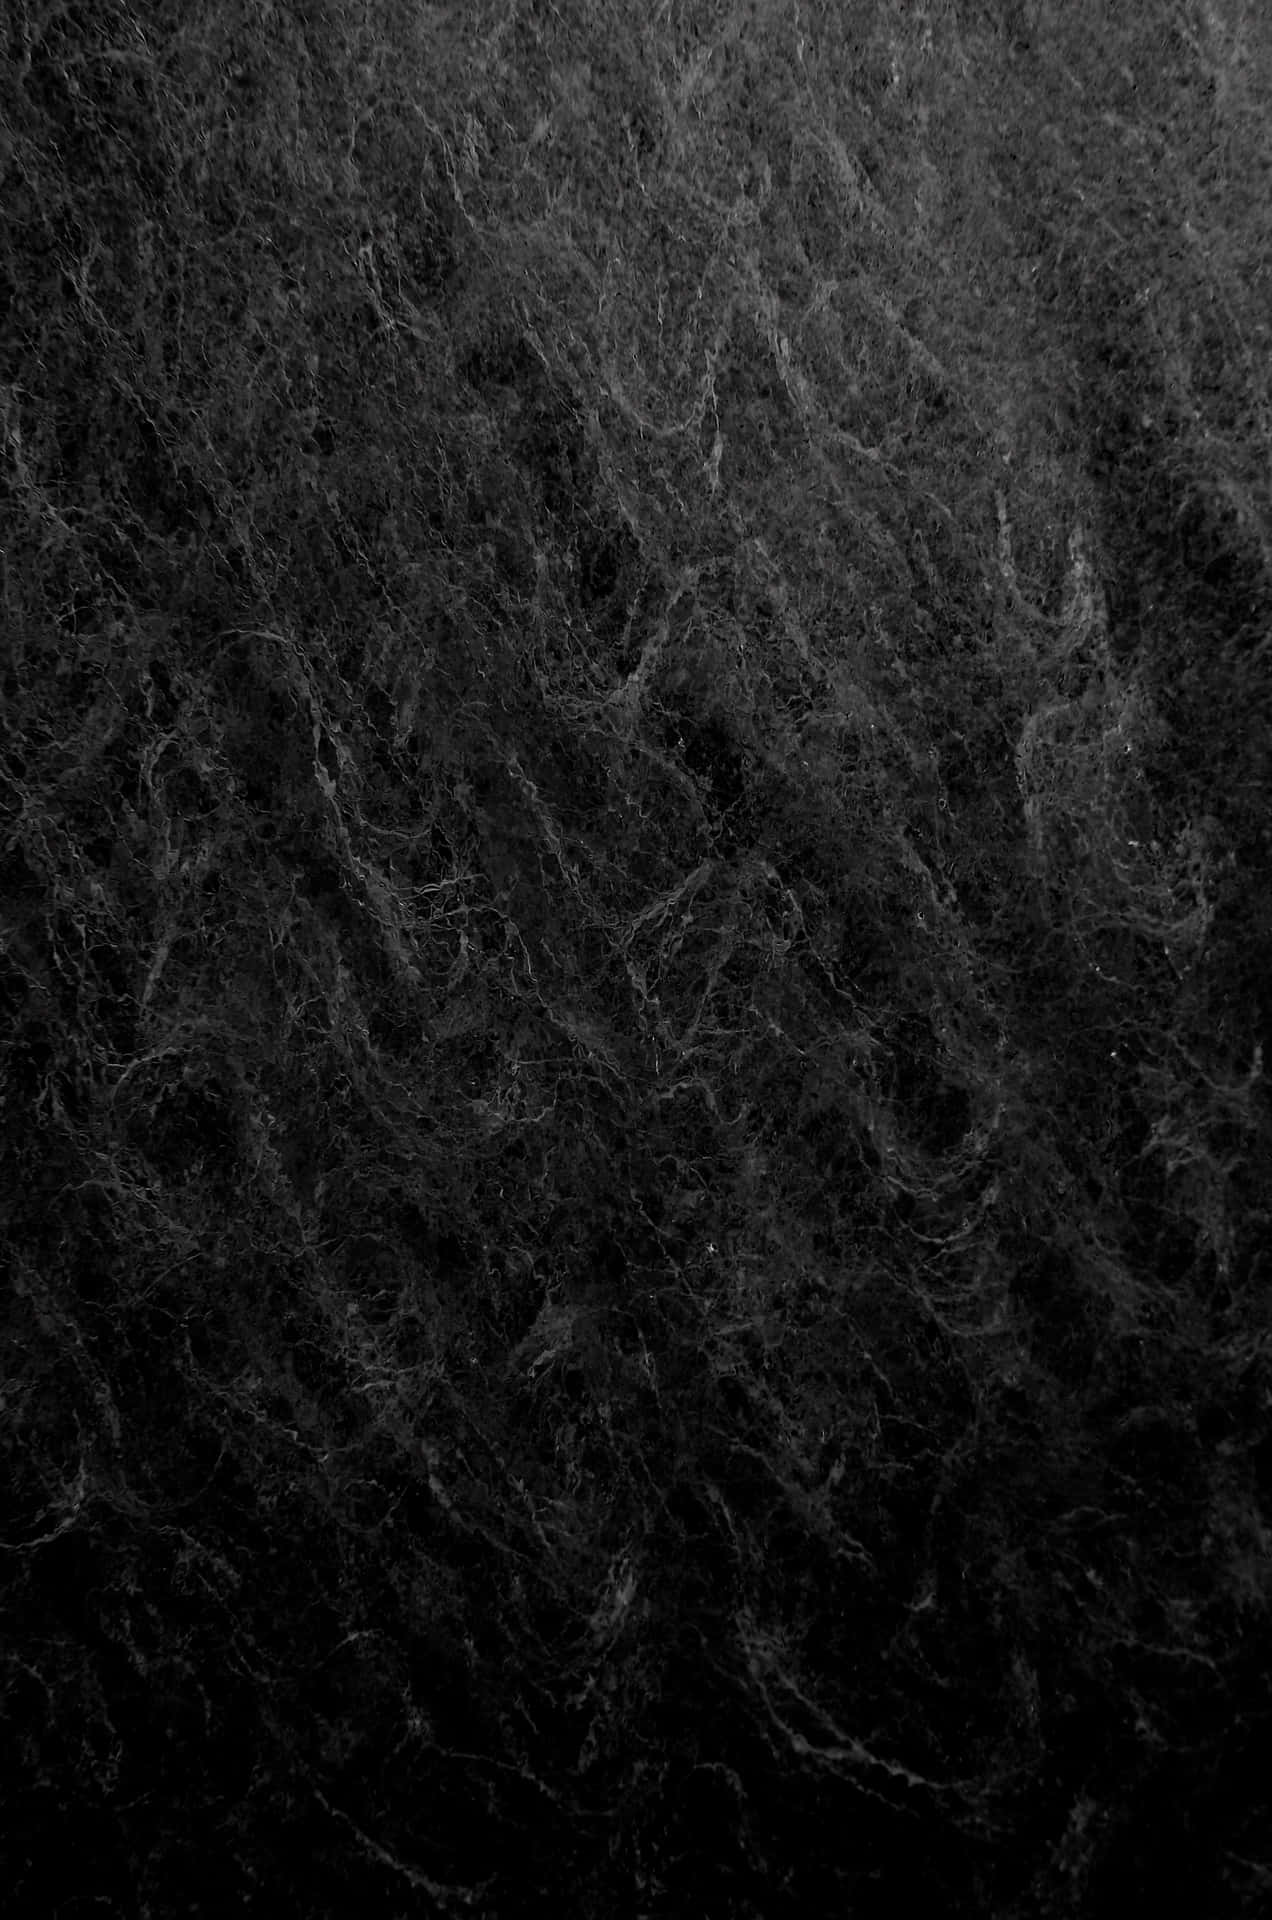 Wavy Wool Black Texture Pictures